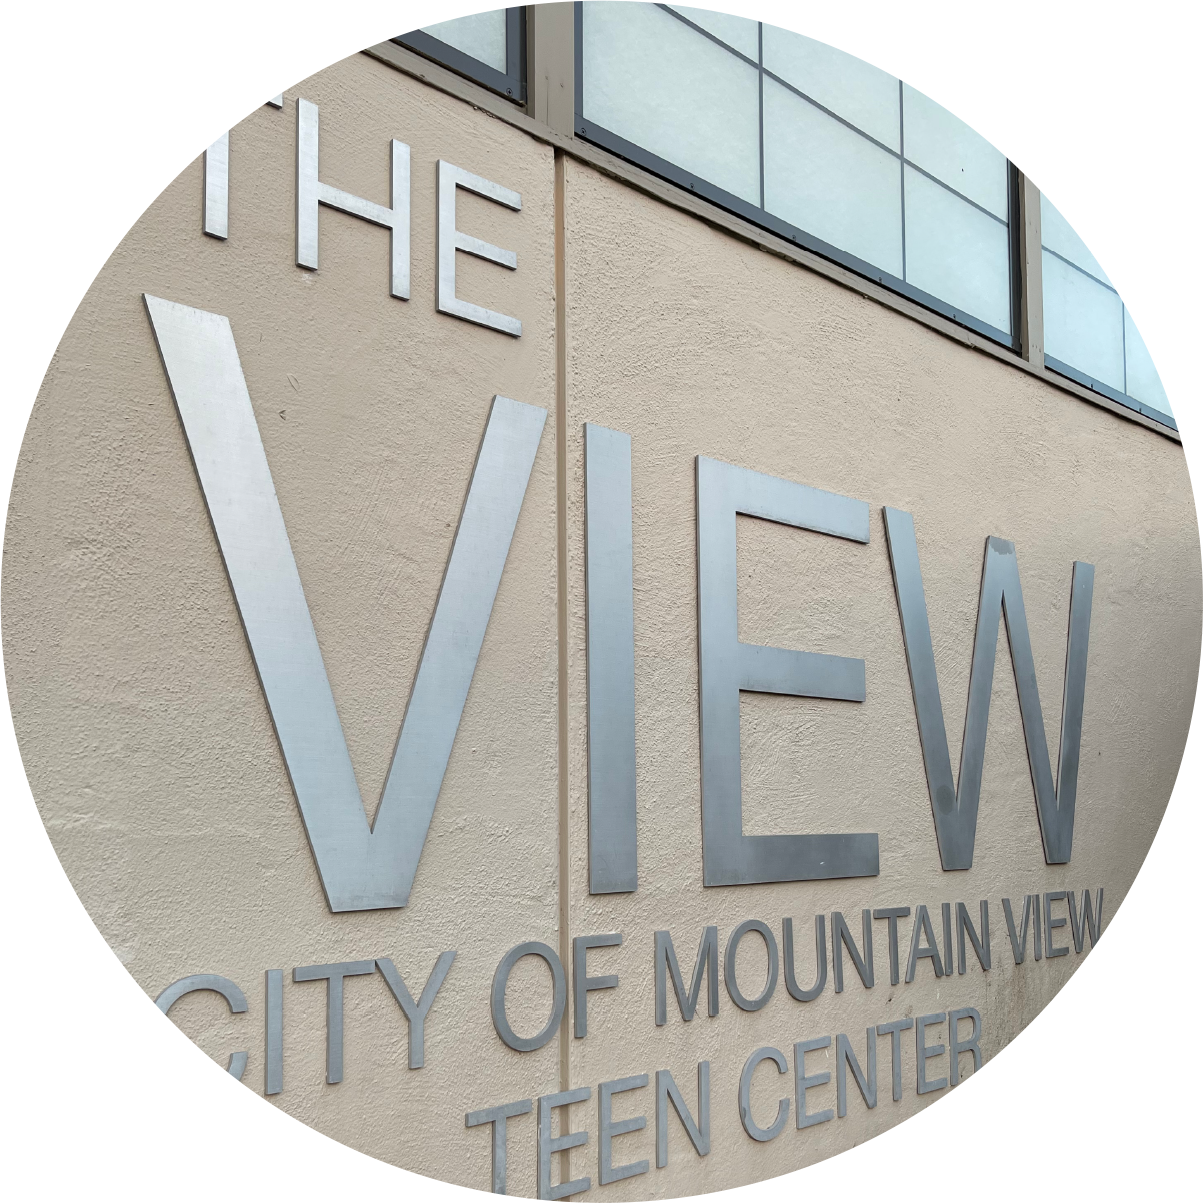 sign on building the view teen center